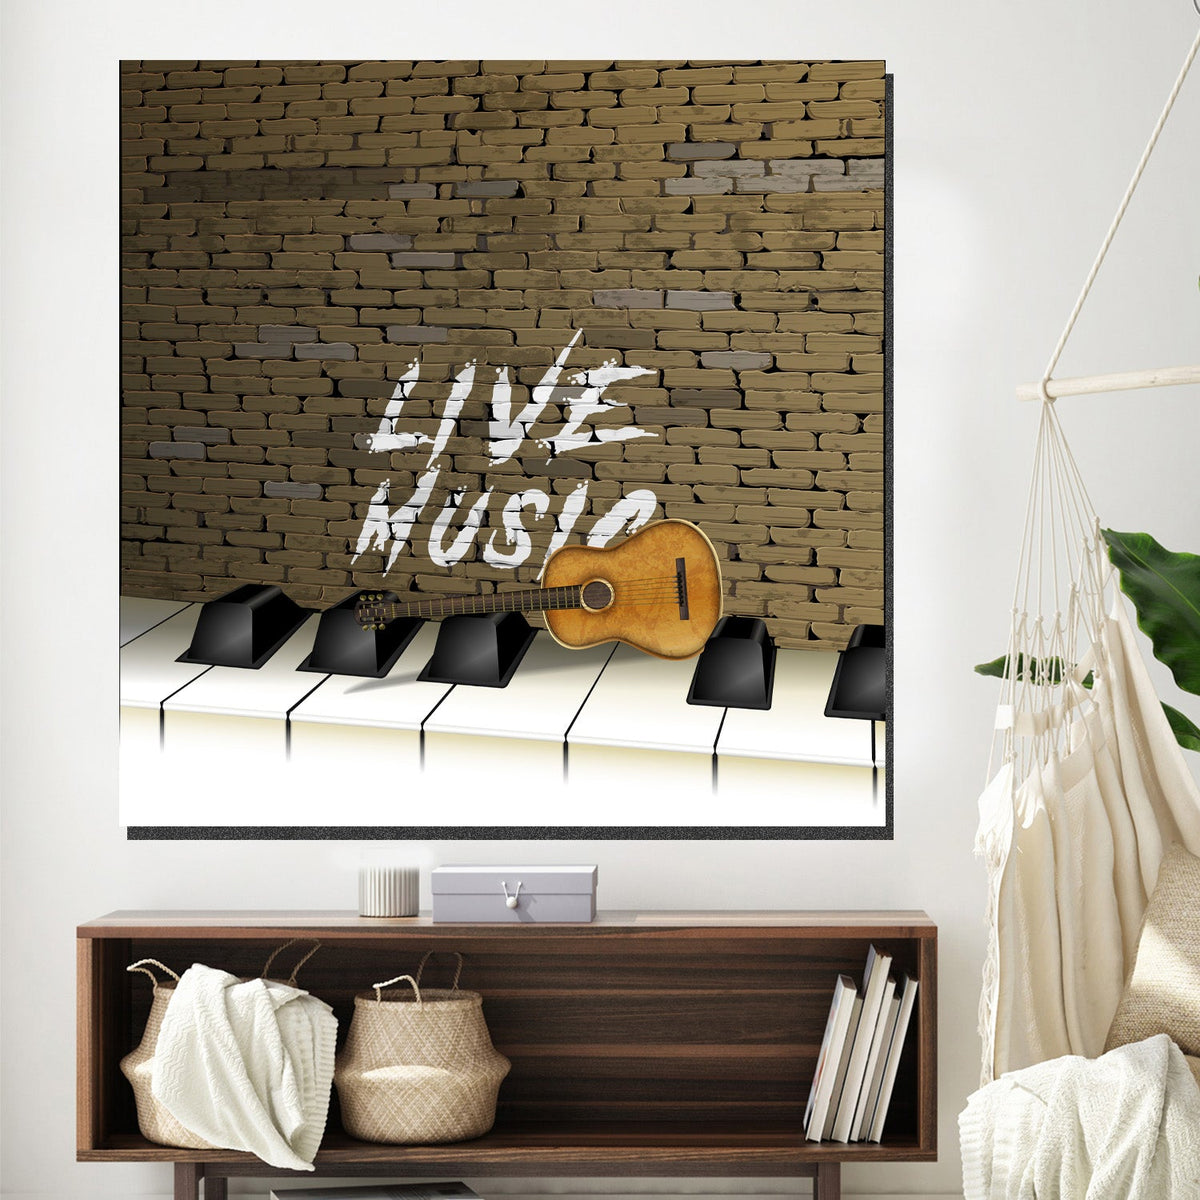 https://cdn.shopify.com/s/files/1/0387/9986/8044/products/LiveMusicPianoGuitarCanvasArtprintStretched-1.jpg